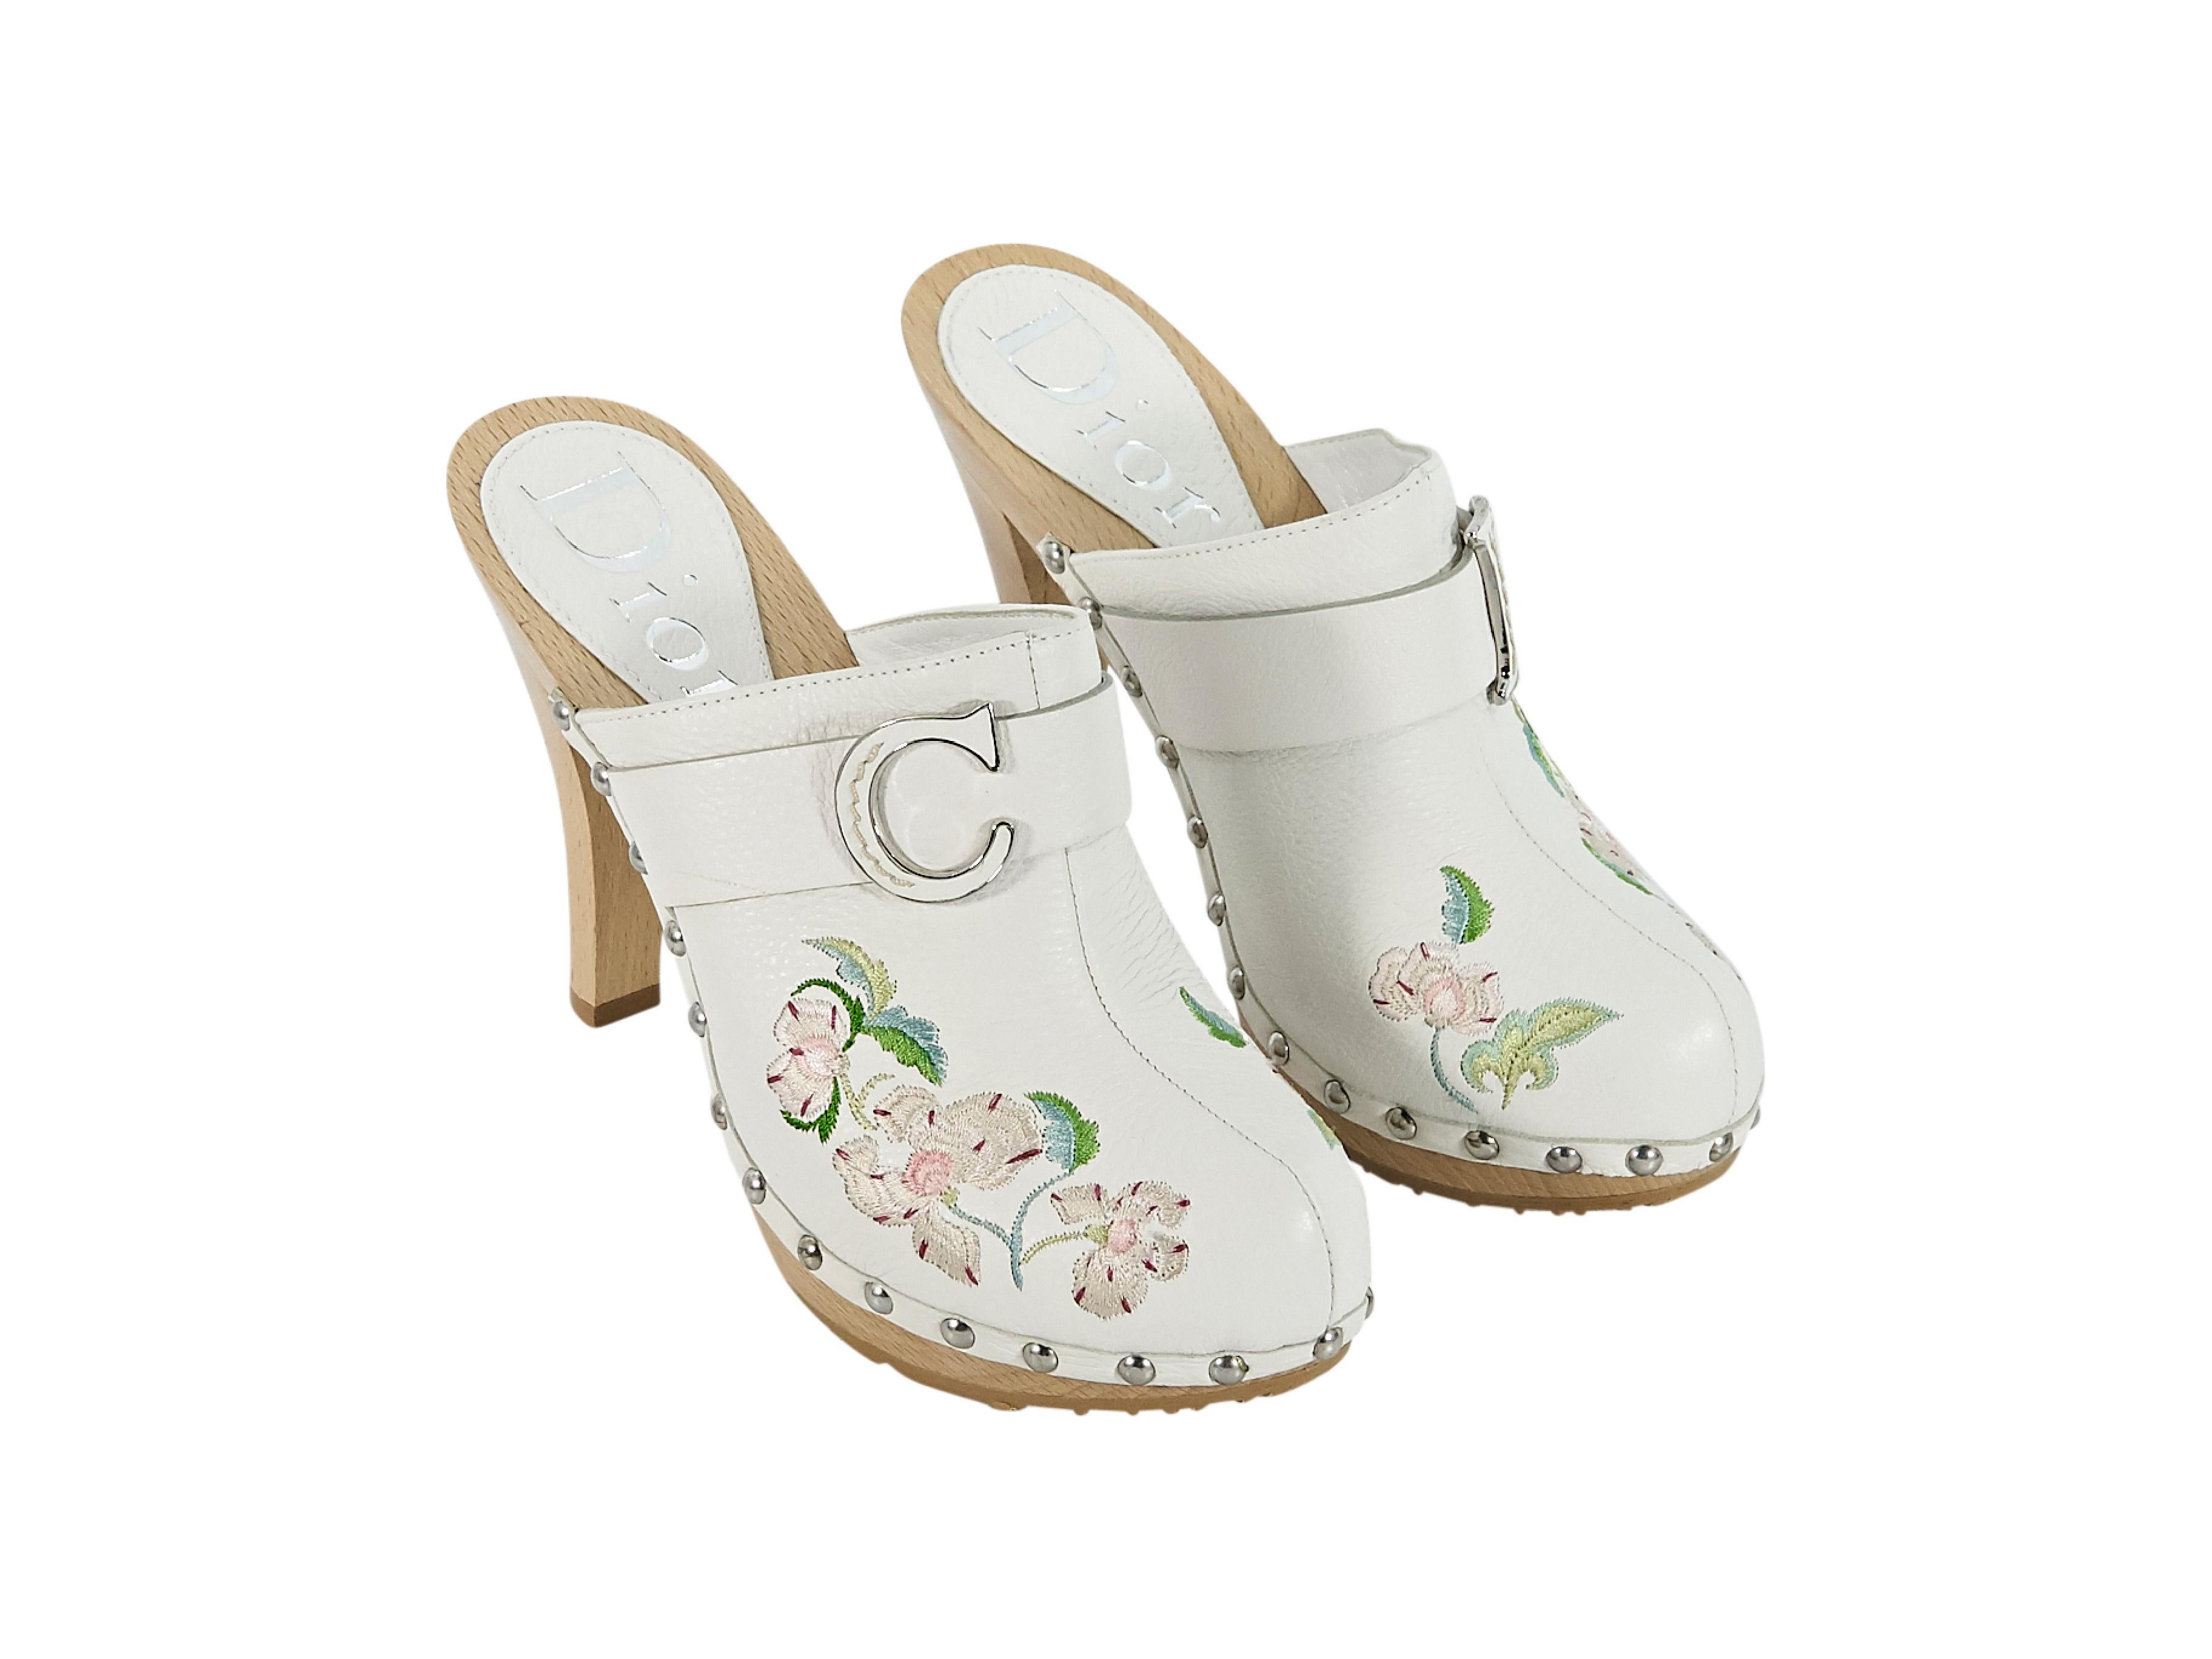 Product details:  White leather heeled clogs by Christian Dior.  Floral embroidered design accented with studs.  Round toe.  Wooden stiletto and low platform.  Slip-on style.  Silvertone hardware.  4.5